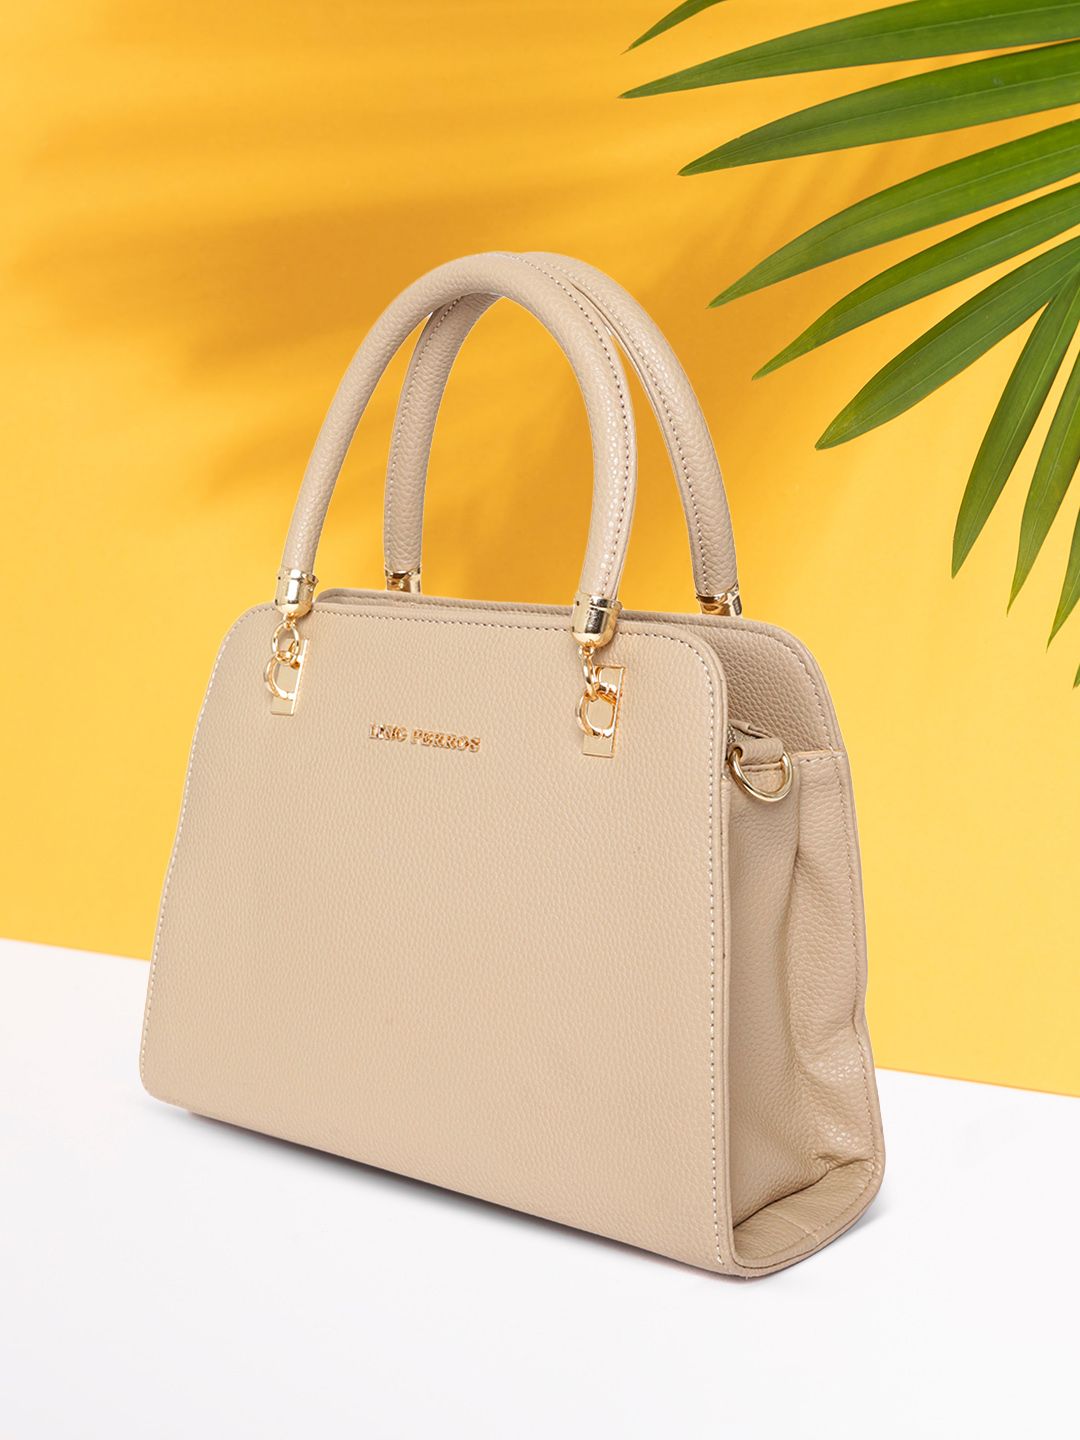 Lino Perros Beige Solid Handheld Bag with Sling Strap Price in India